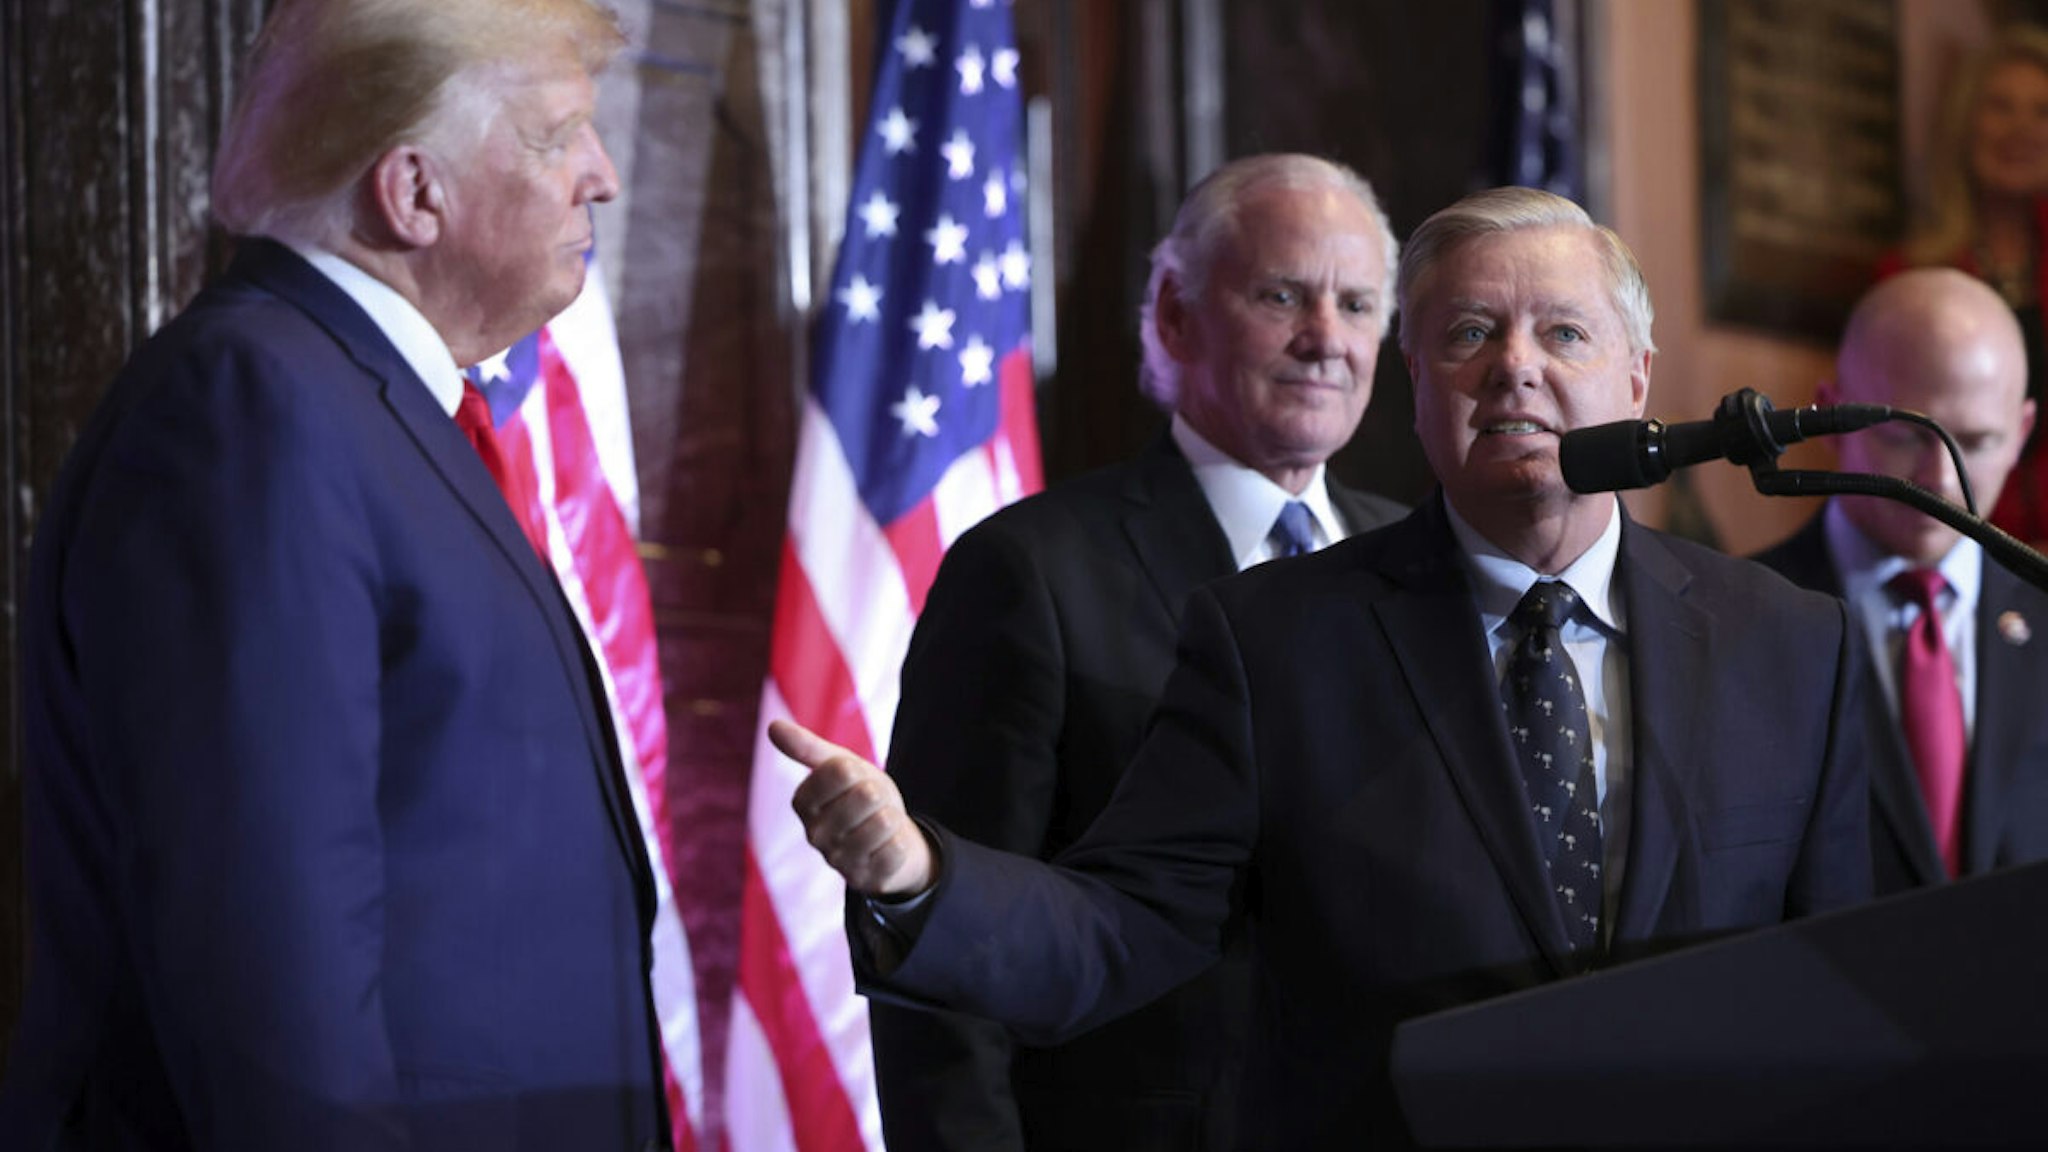 U.S. Sen. Lindsey Graham (R-SC) speaks about former U.S. President Donald Trump during an event at the South Carolina State House on January 28, 2023 in Columbia, South Carolina.